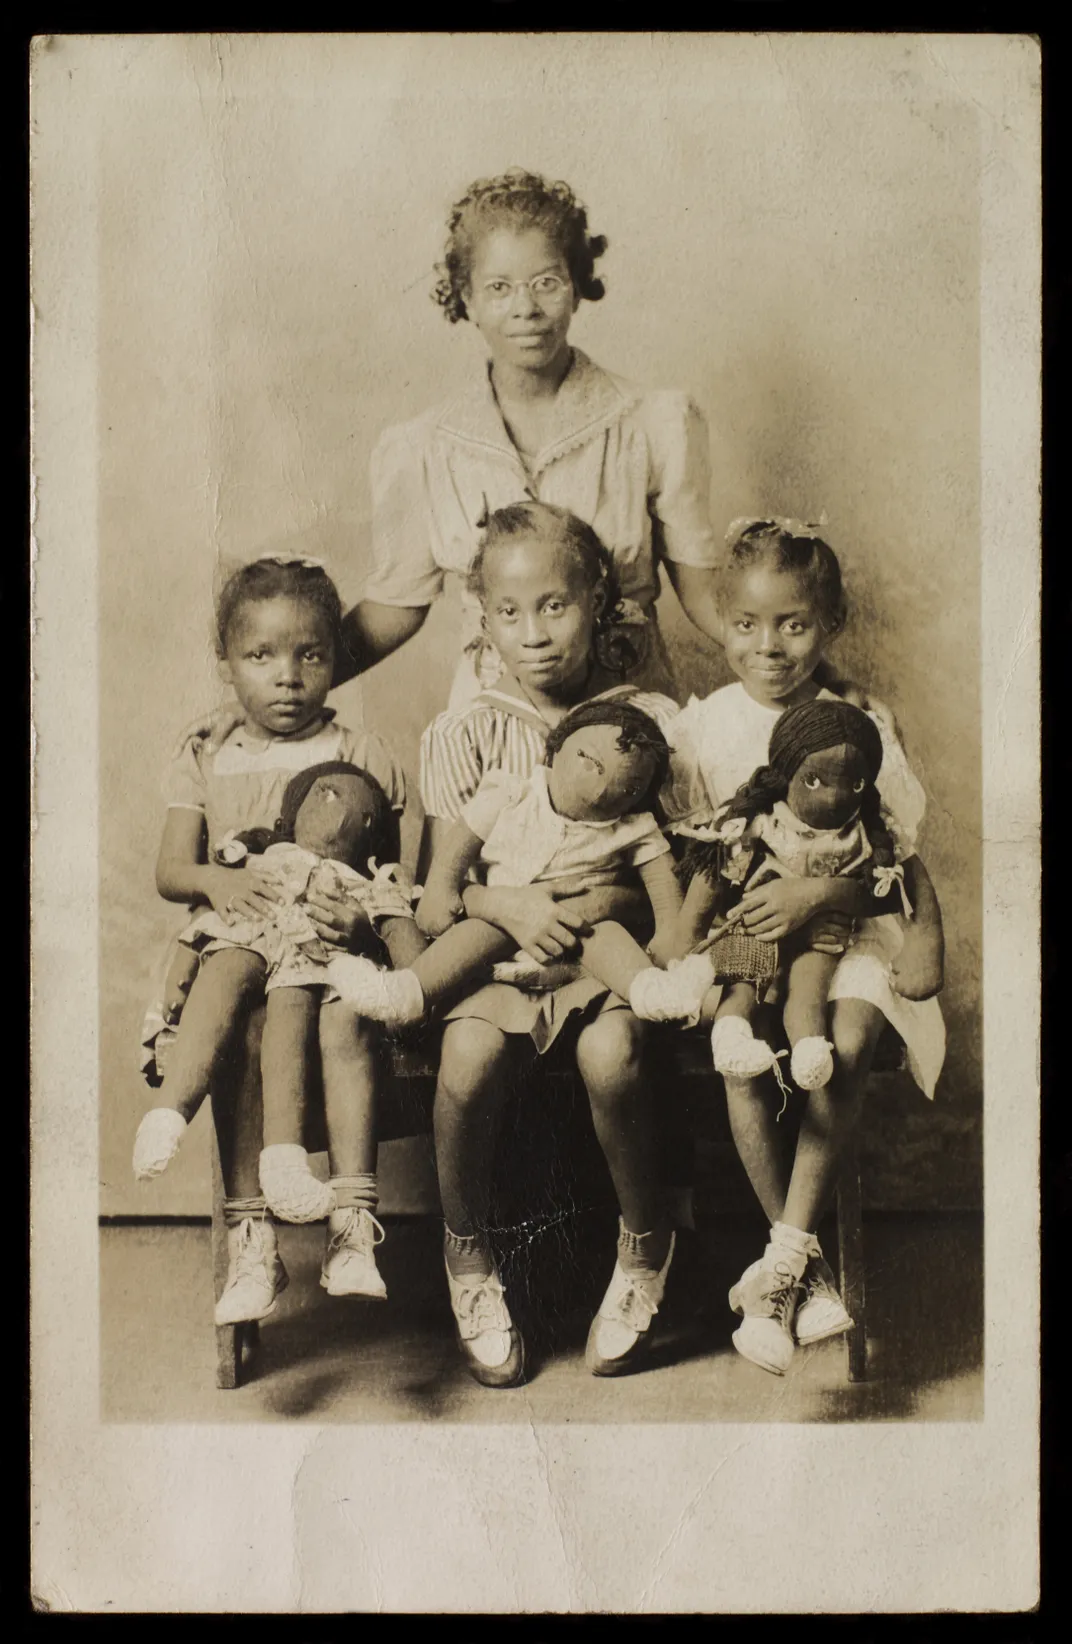 A sepia toned image of one woman standing behind three young girls, seated, each smiling and holding a Black cloth doll in her lap